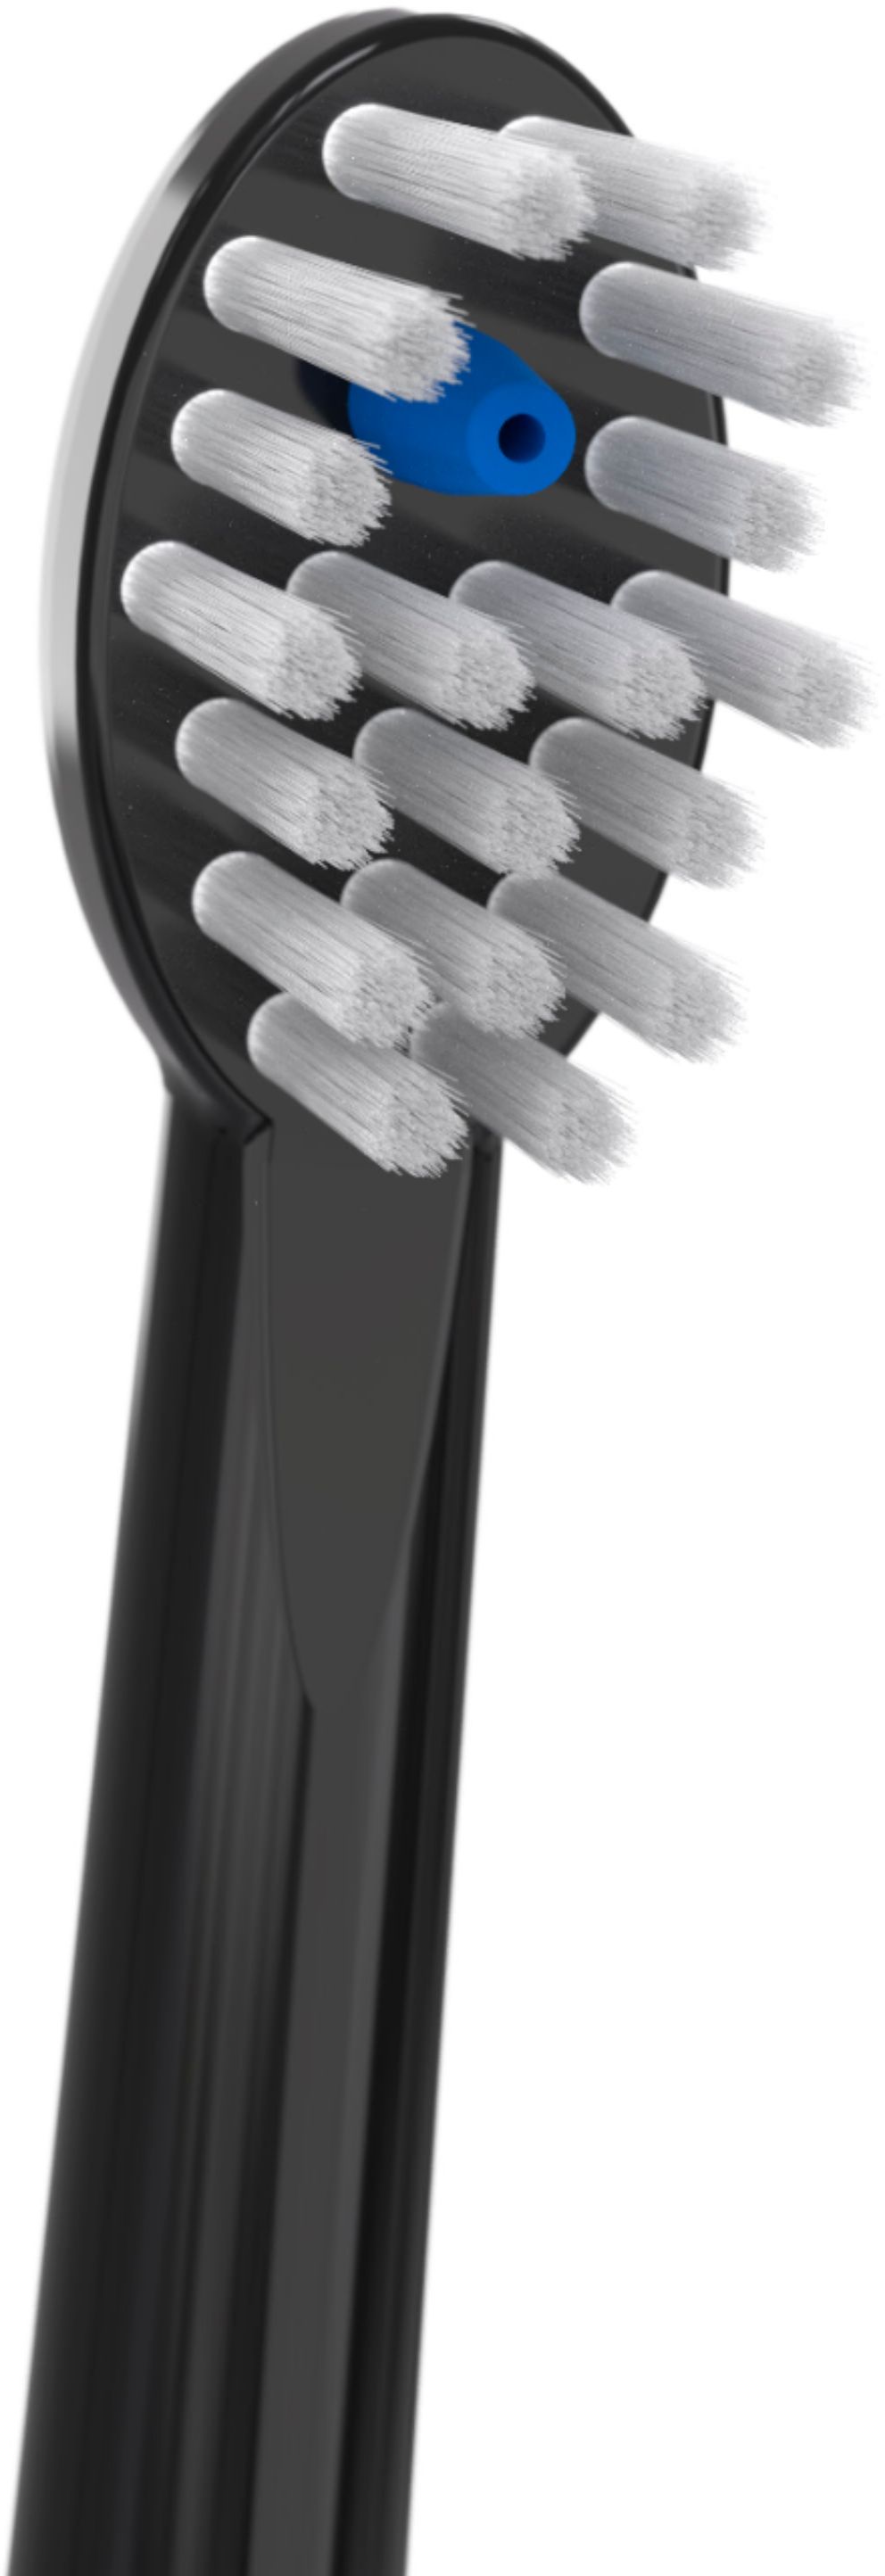 Left View: Waterpik - Sonic-Fusion Replacement Brush Heads (4-Pack) - Black